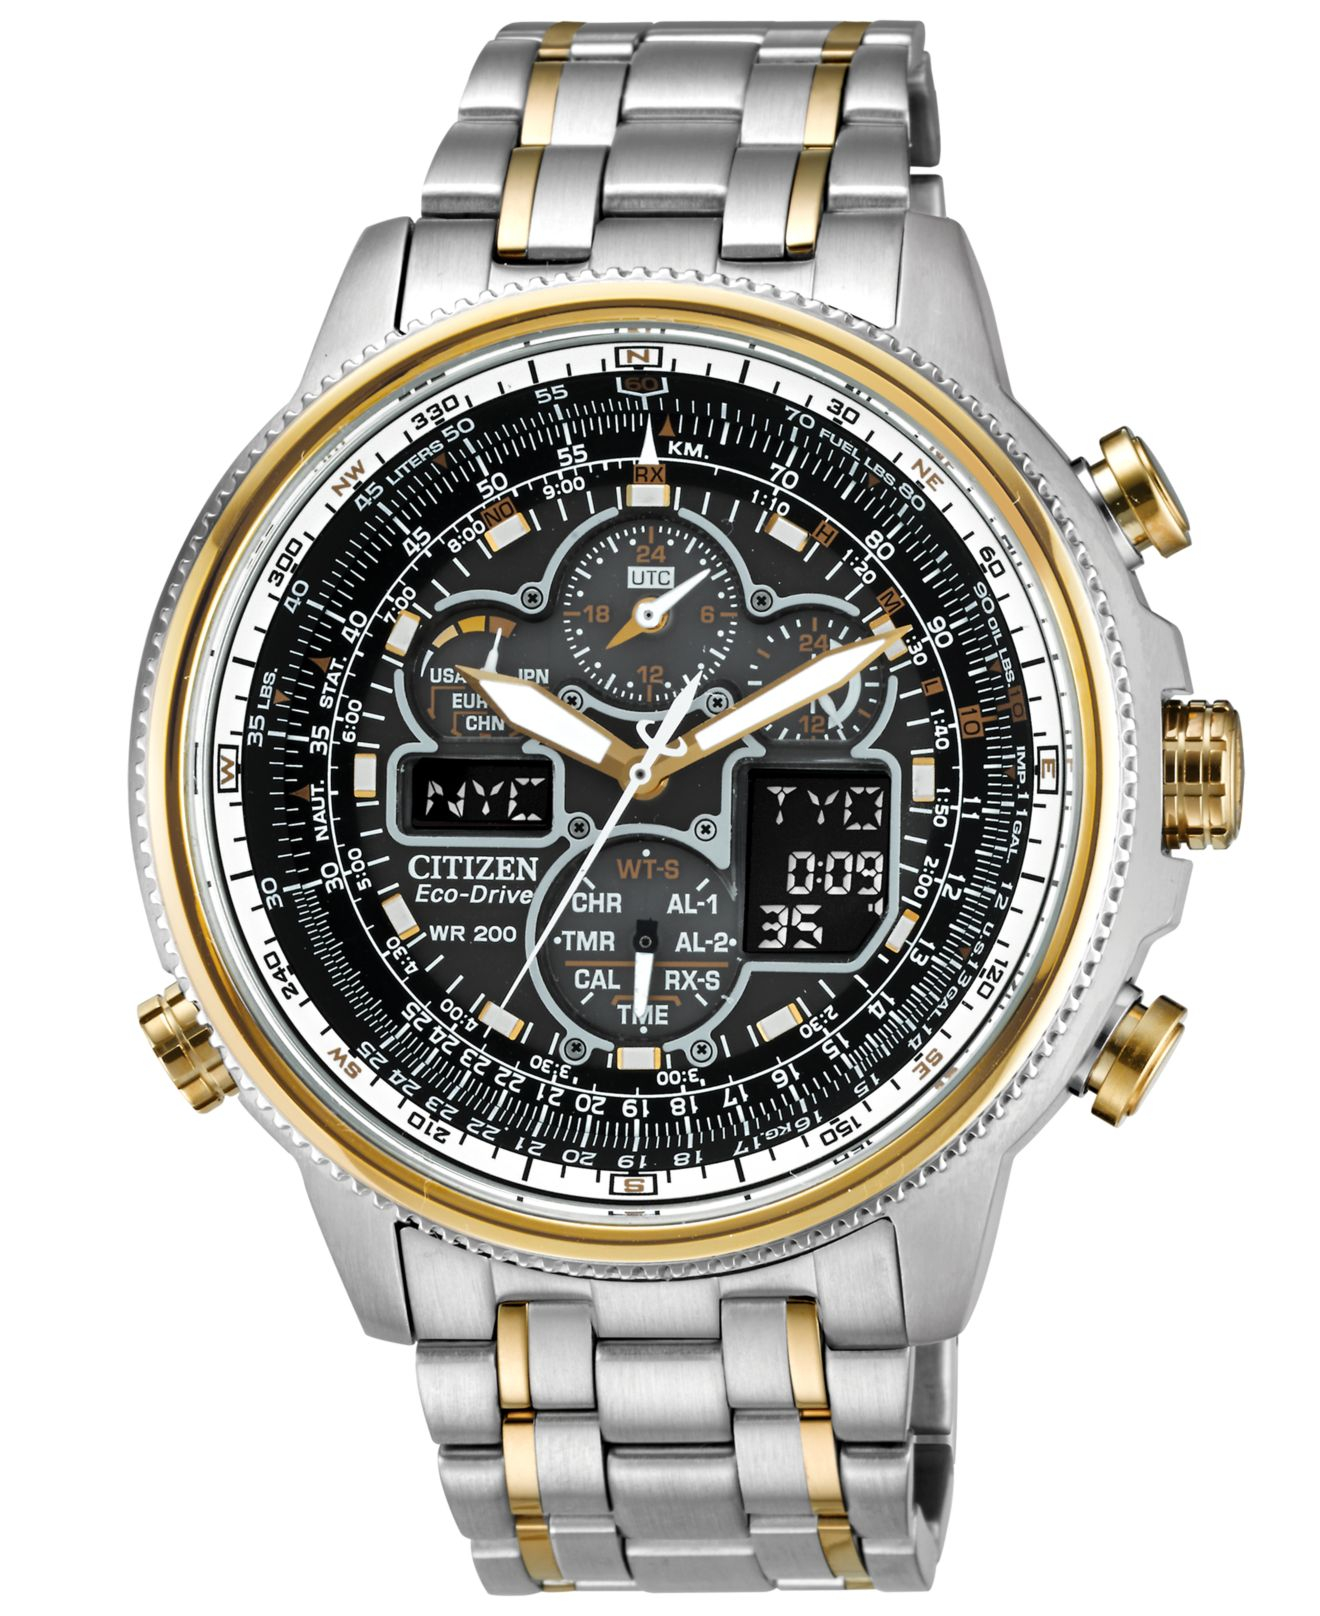 Citizen Men's Eco-drive Navihawk A-t Two-tone Stainless Steel